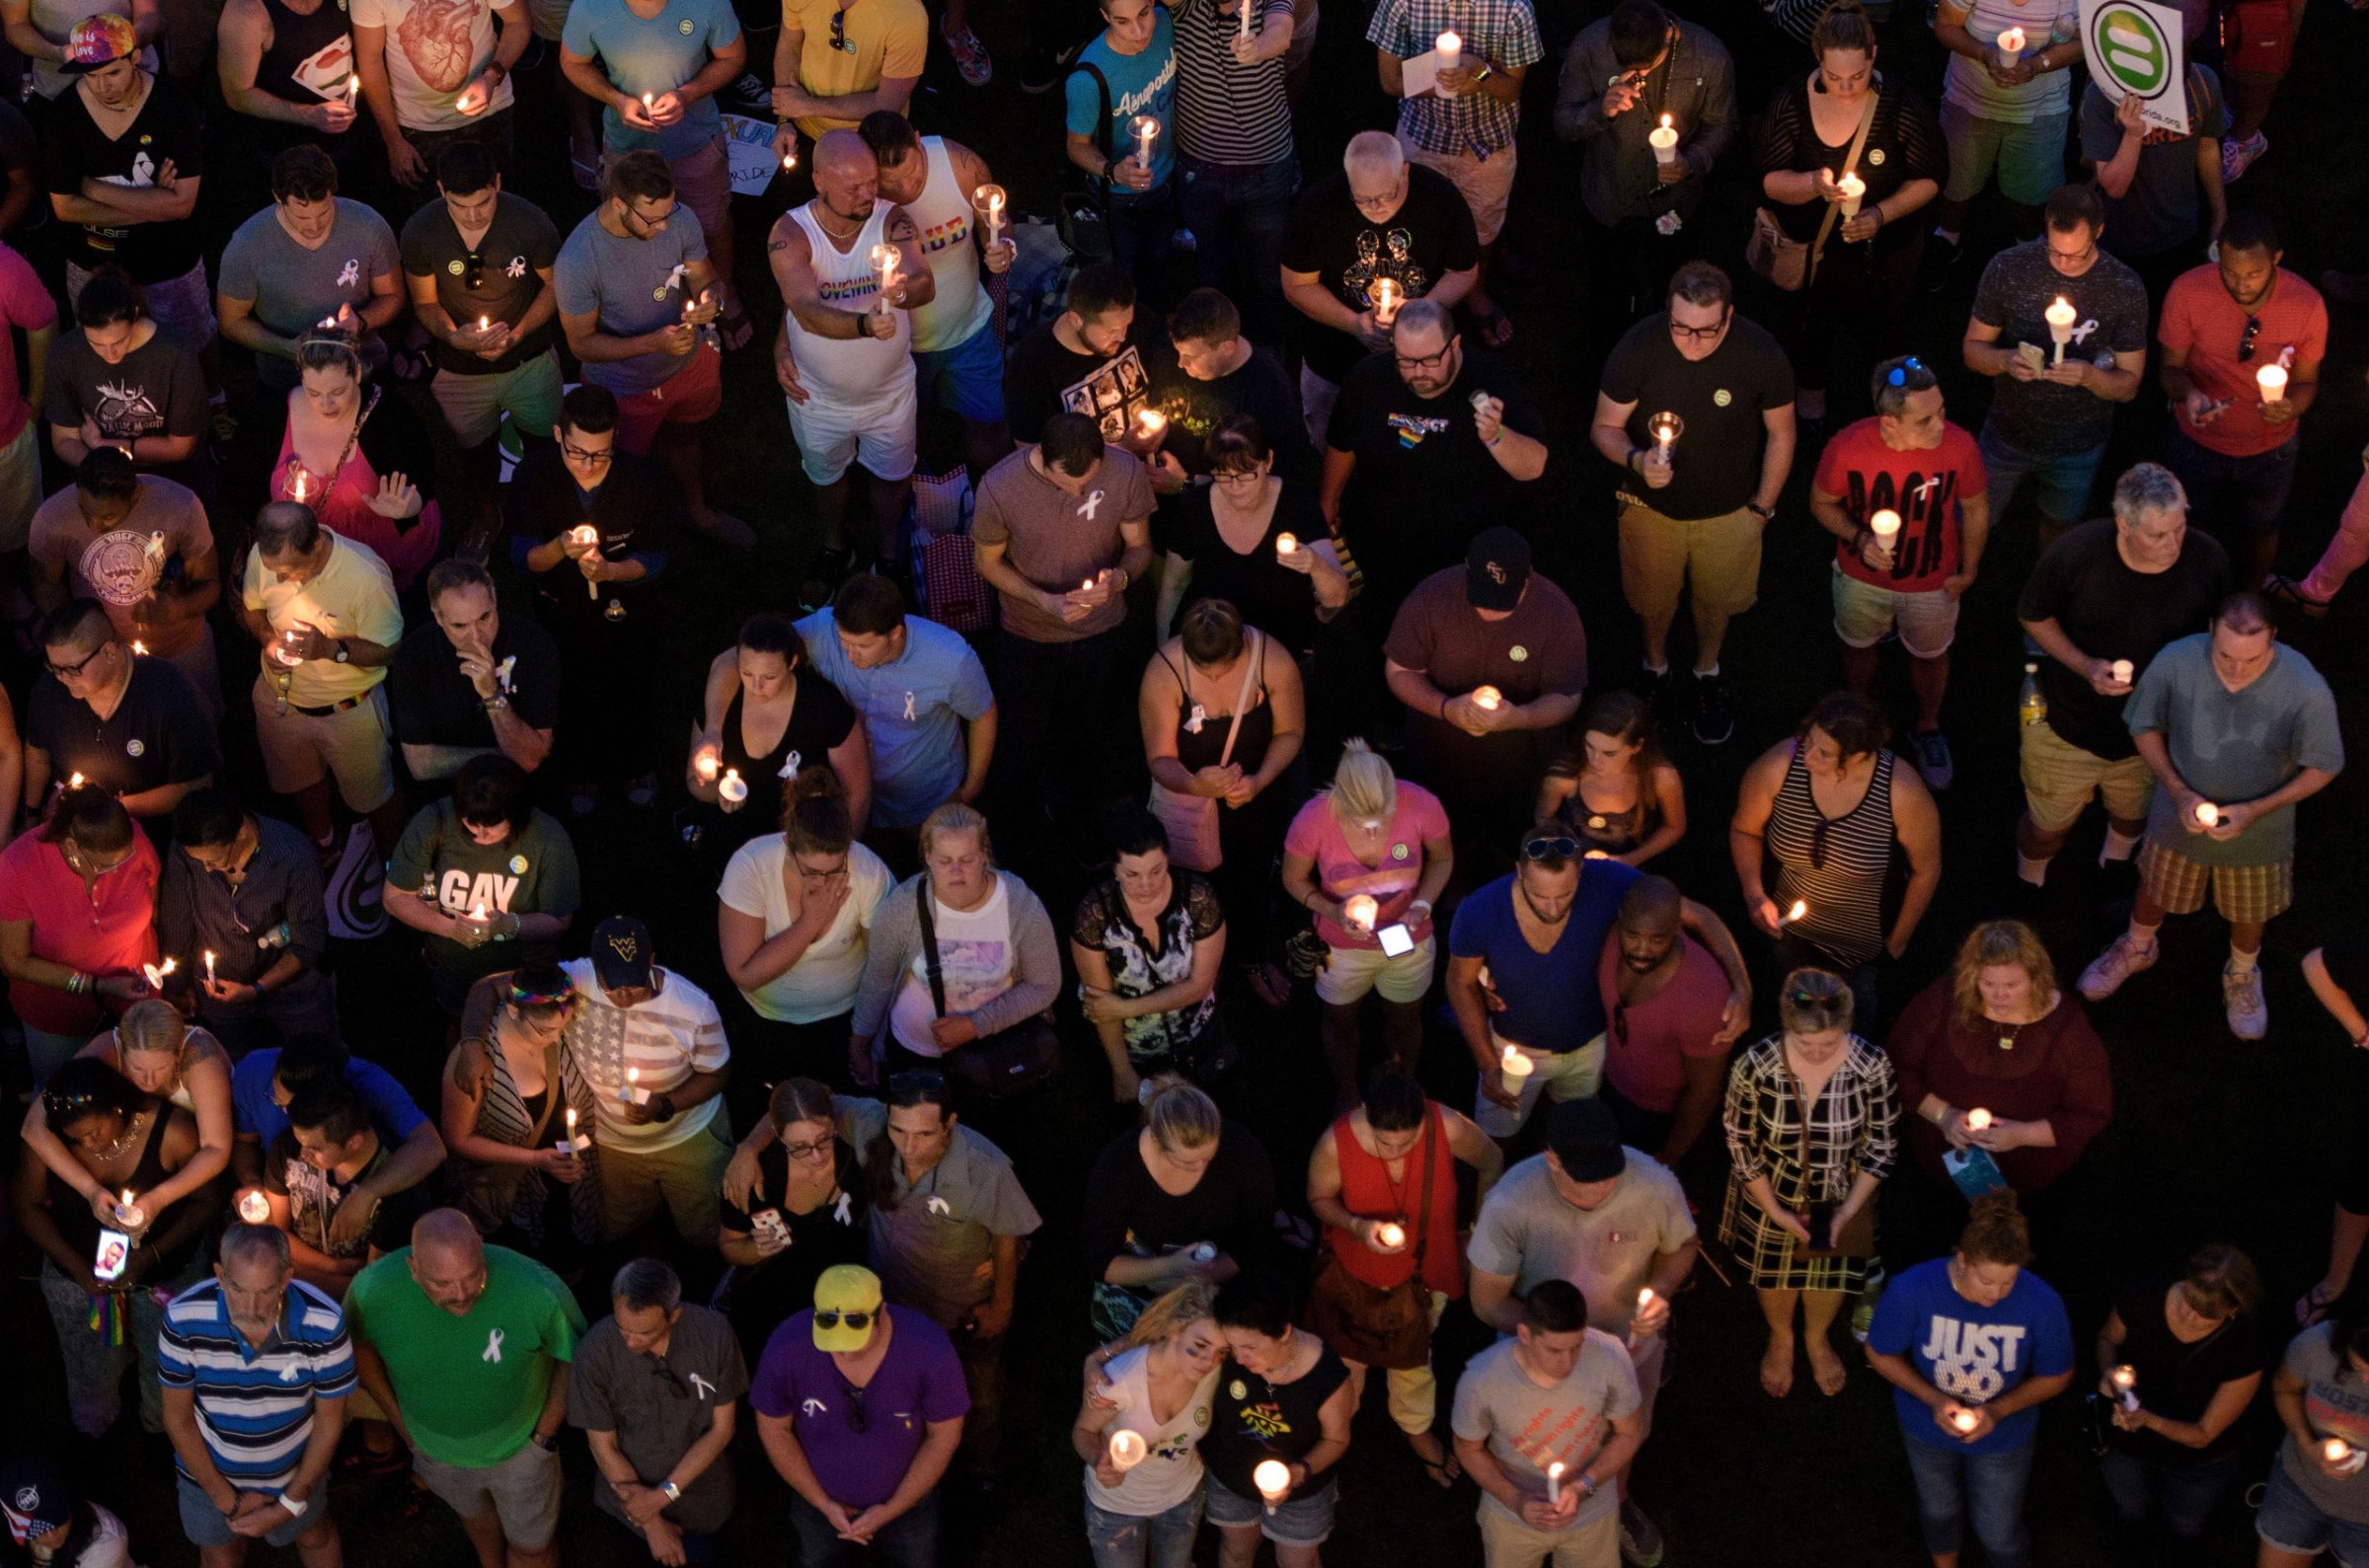 Mourners hold candles while observing a moment of silence during a vigil outside the Dr. Phillips Center for the Performing Arts for the mass shooting victims at the Pulse nightclub in Orlando, Fla.